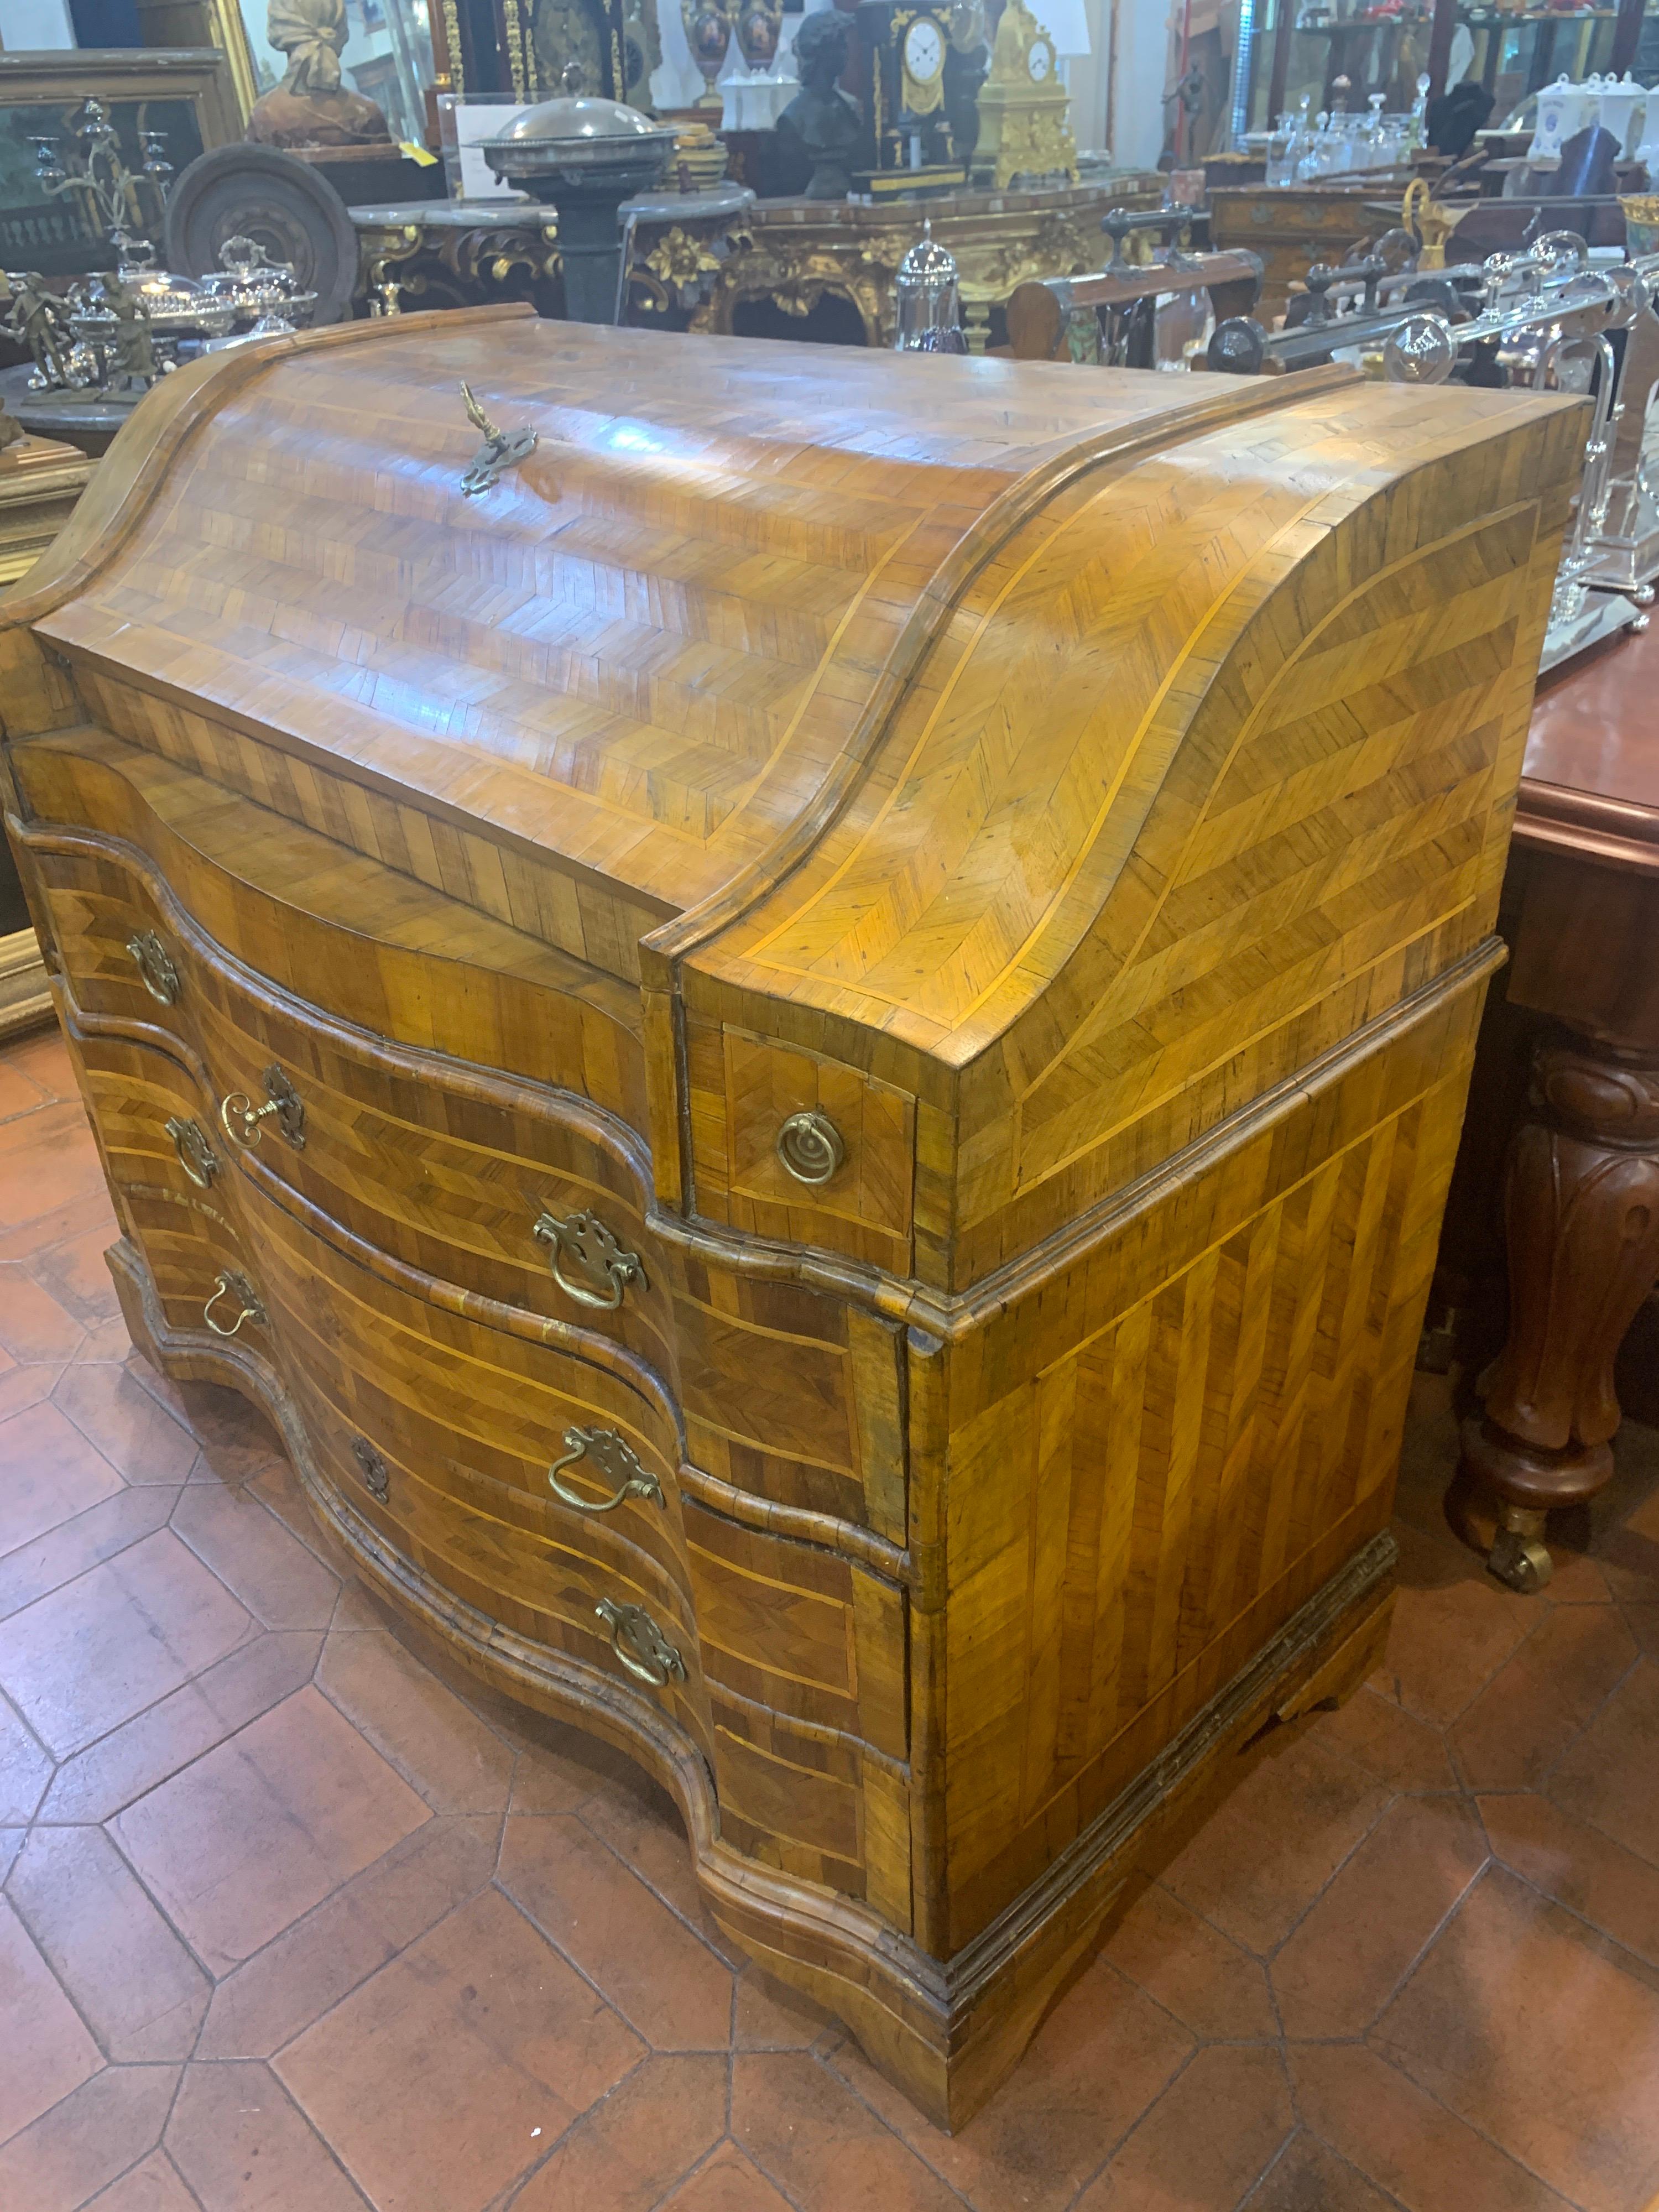 Fantastic example of cabinet-making in Verona, we are faced with a work of art, a piece of furniture sinuous in shape, completely original in the wooden part; the handles alas have been replaced but it is permissible on a 270 years old piece of